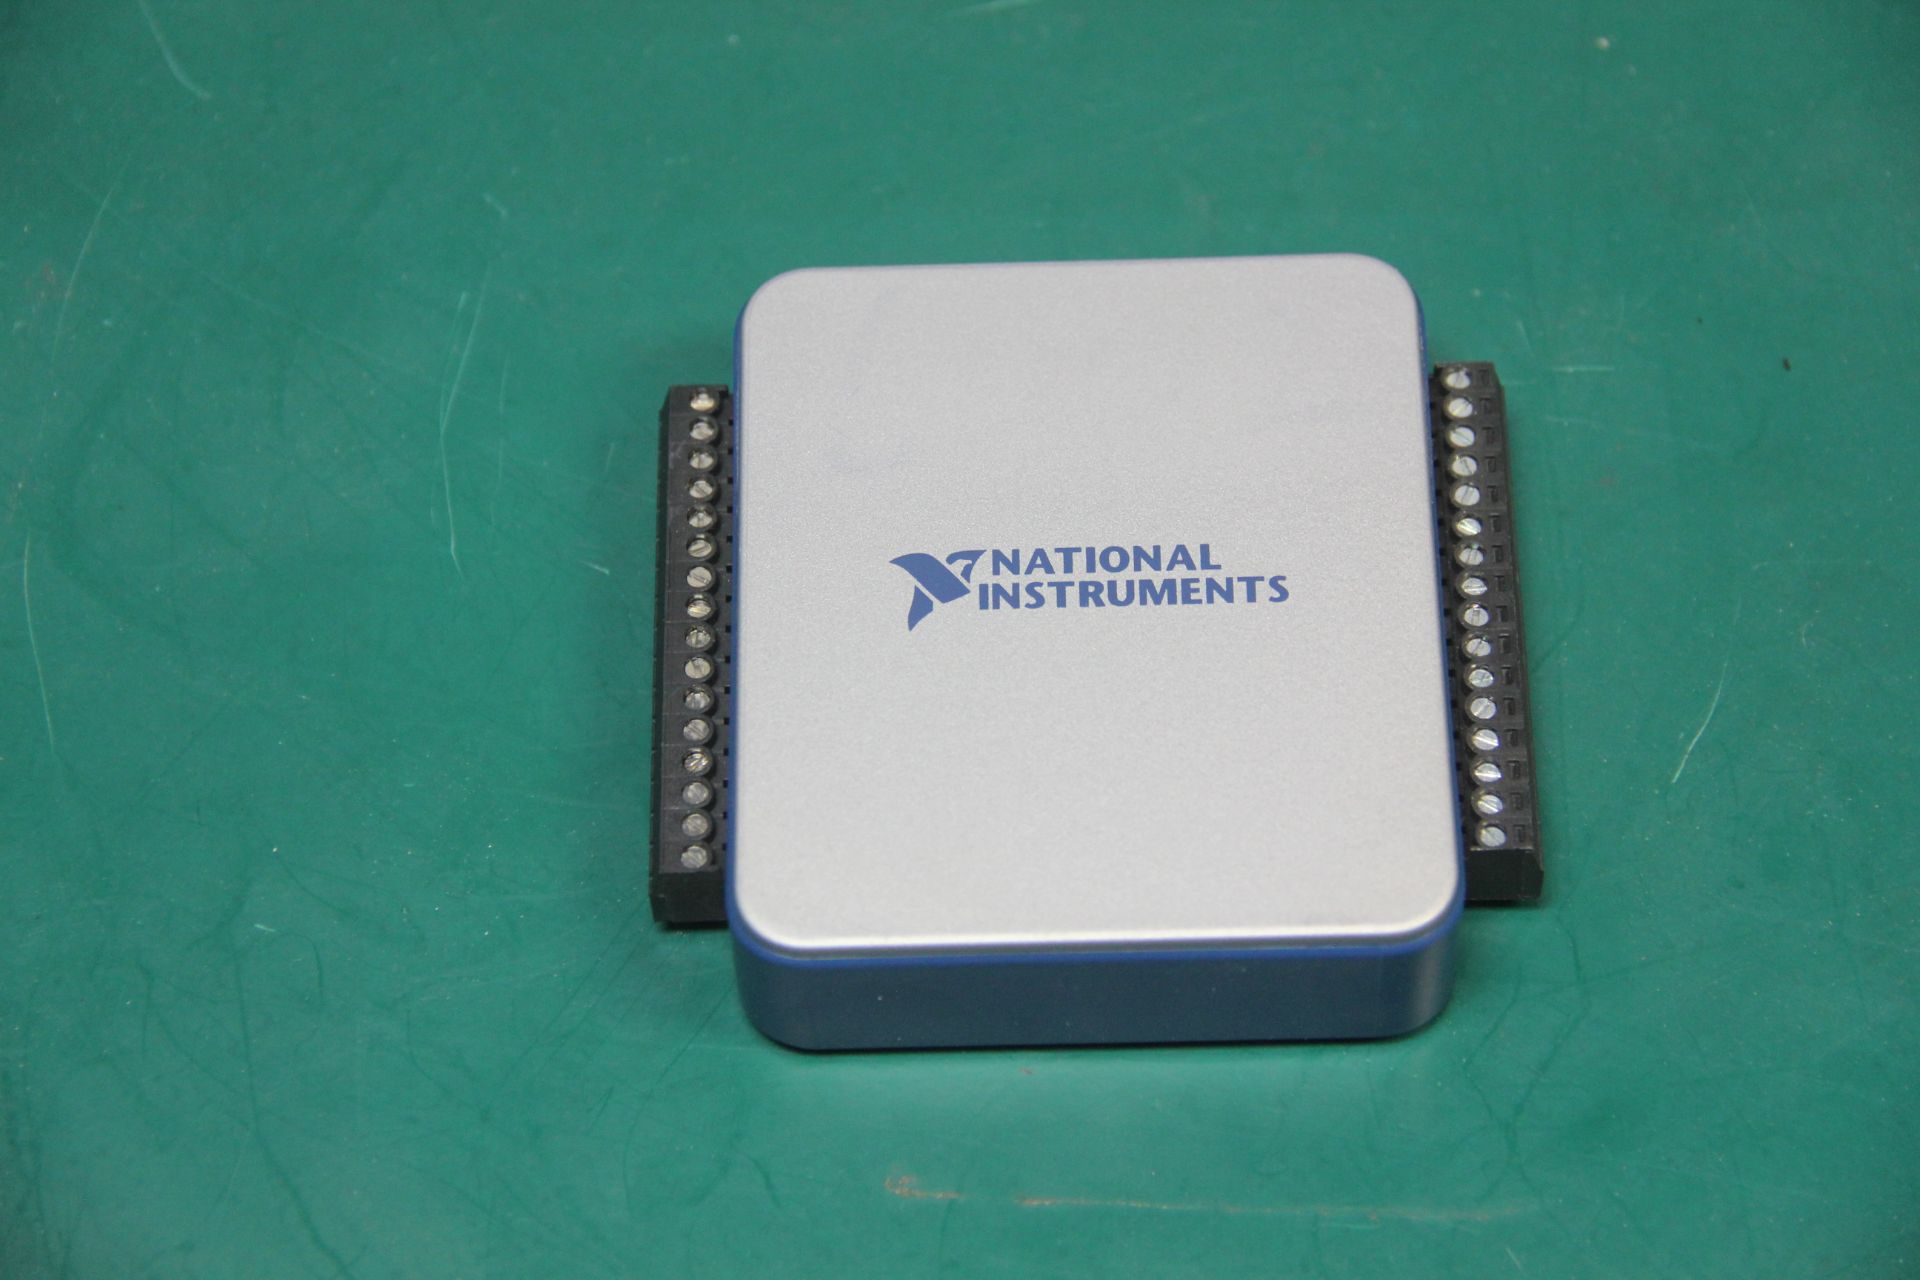 NATIONAL INSTRUMENTS DATA ACQUISITION DEVICE